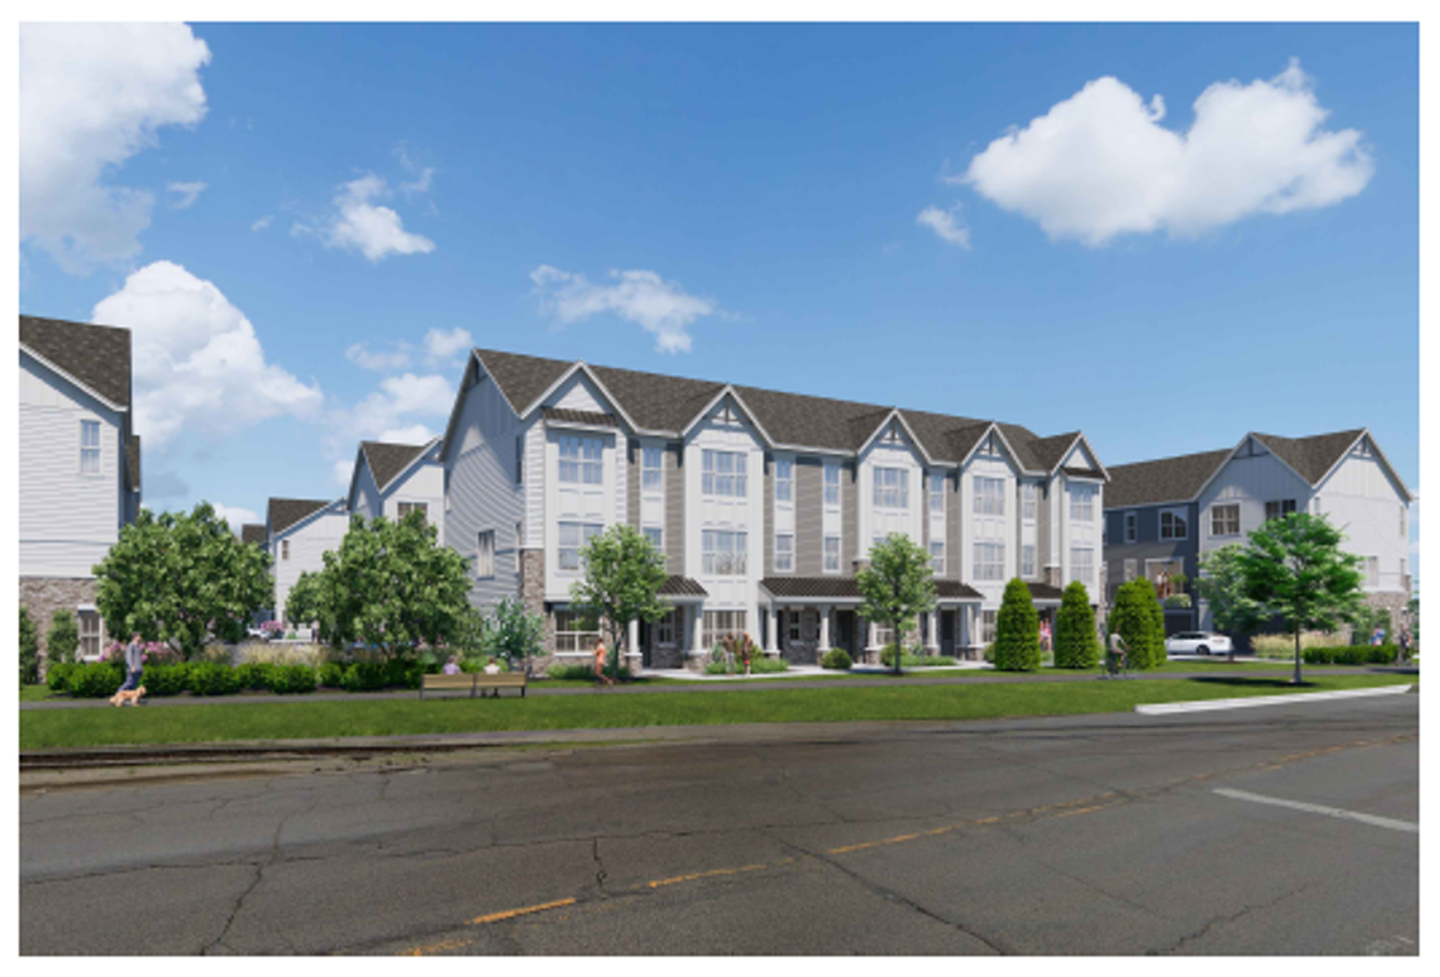 A rendering of the townhome-style buildings proposed for the residential development at 95 E. Crystal Lake Ave. in Crystal Lake. The project would include 51 townhomes over nine buildings plus 48 apartments in 10th.